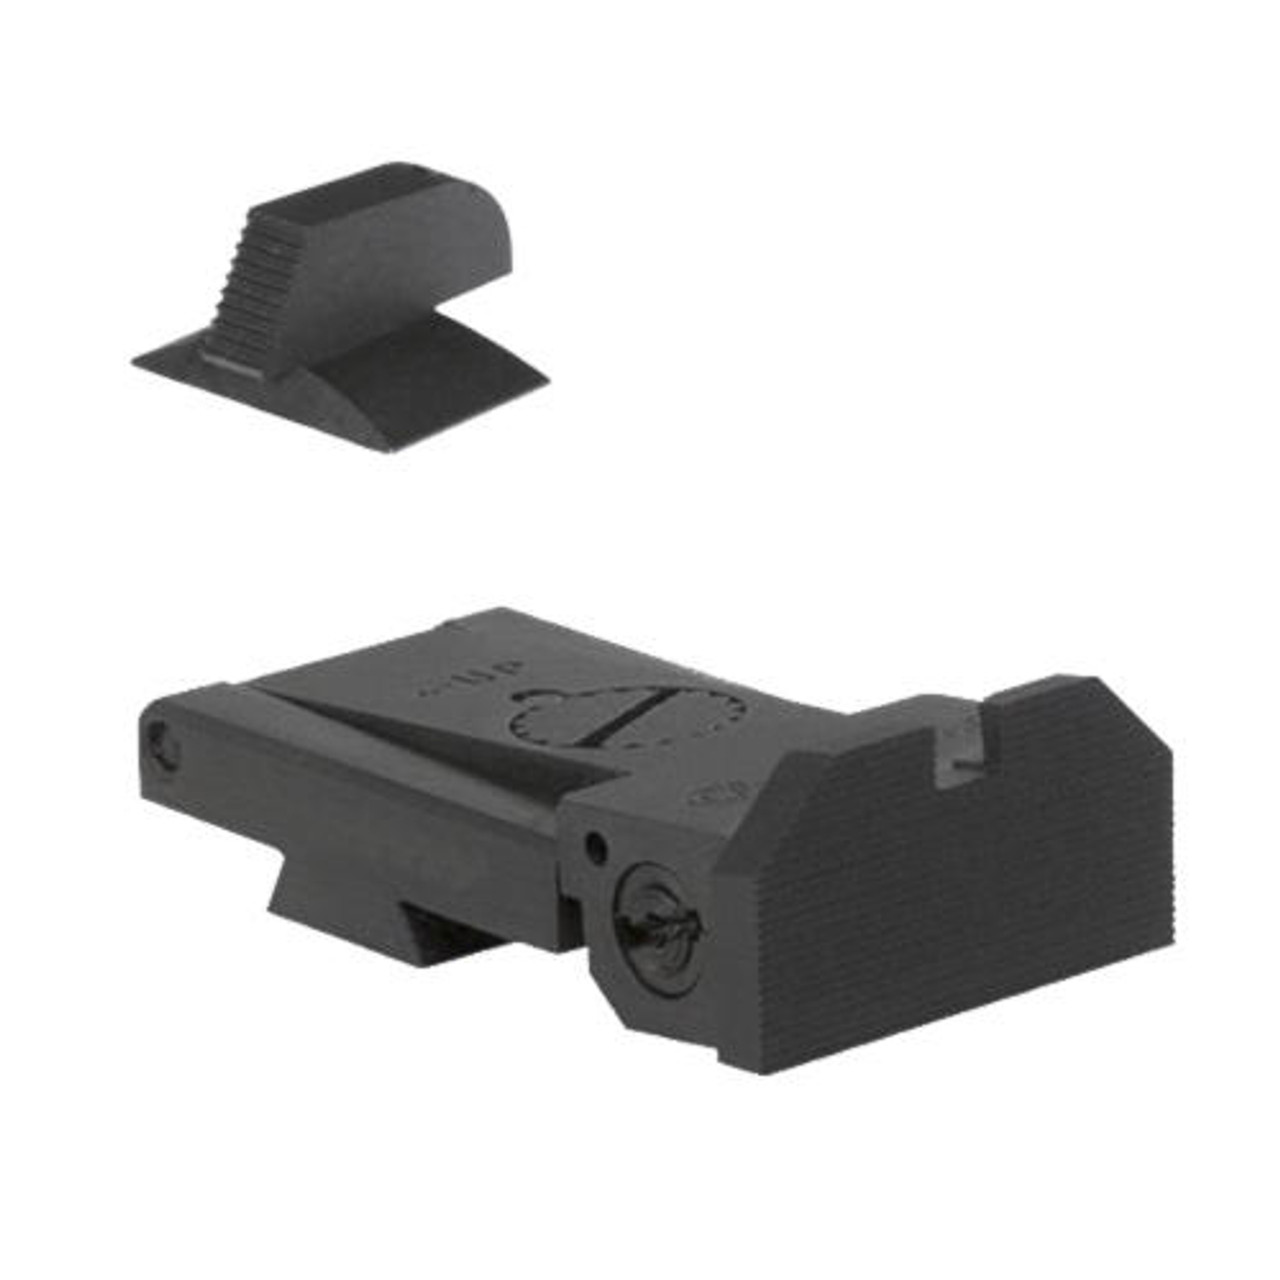 Kensight Kensight Target 1911 Sights Set with Beveled Blade - Serrated 0.200 Front Sights - Fits Bomar BMCS  Sight Dovetail Cut